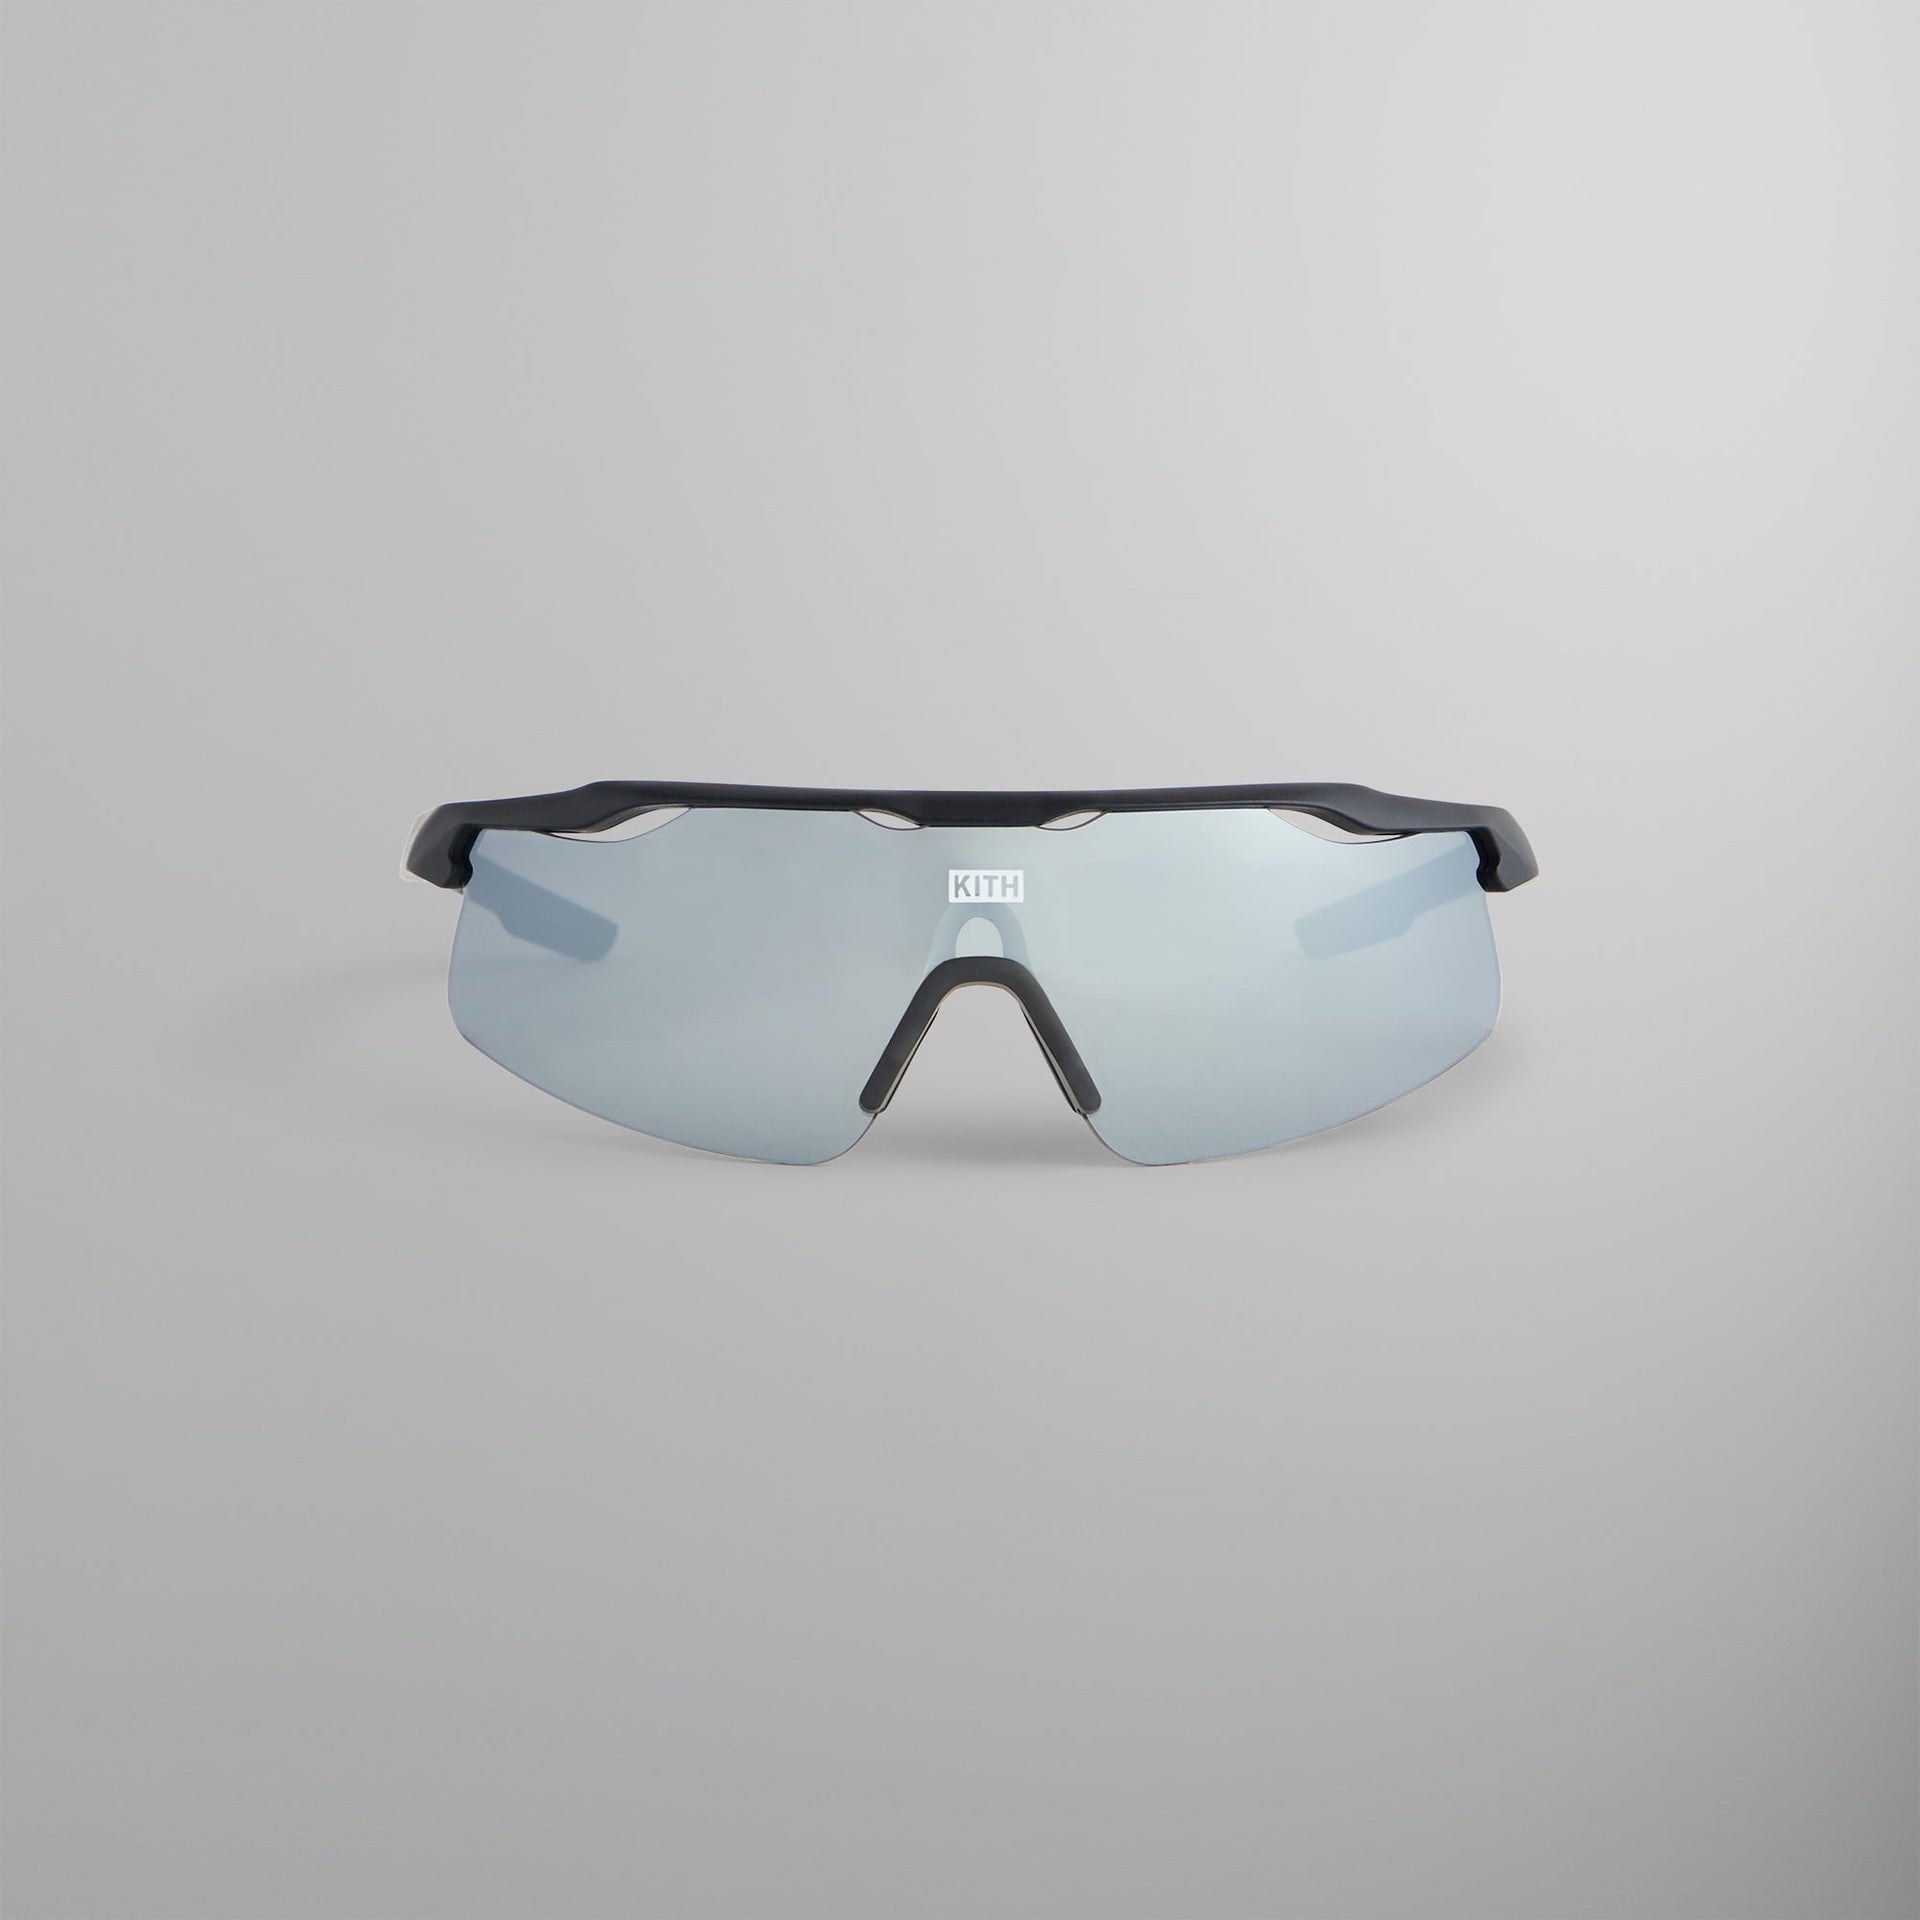 Kith for TaylorMade 24 Racer Sunglasses - Black PH